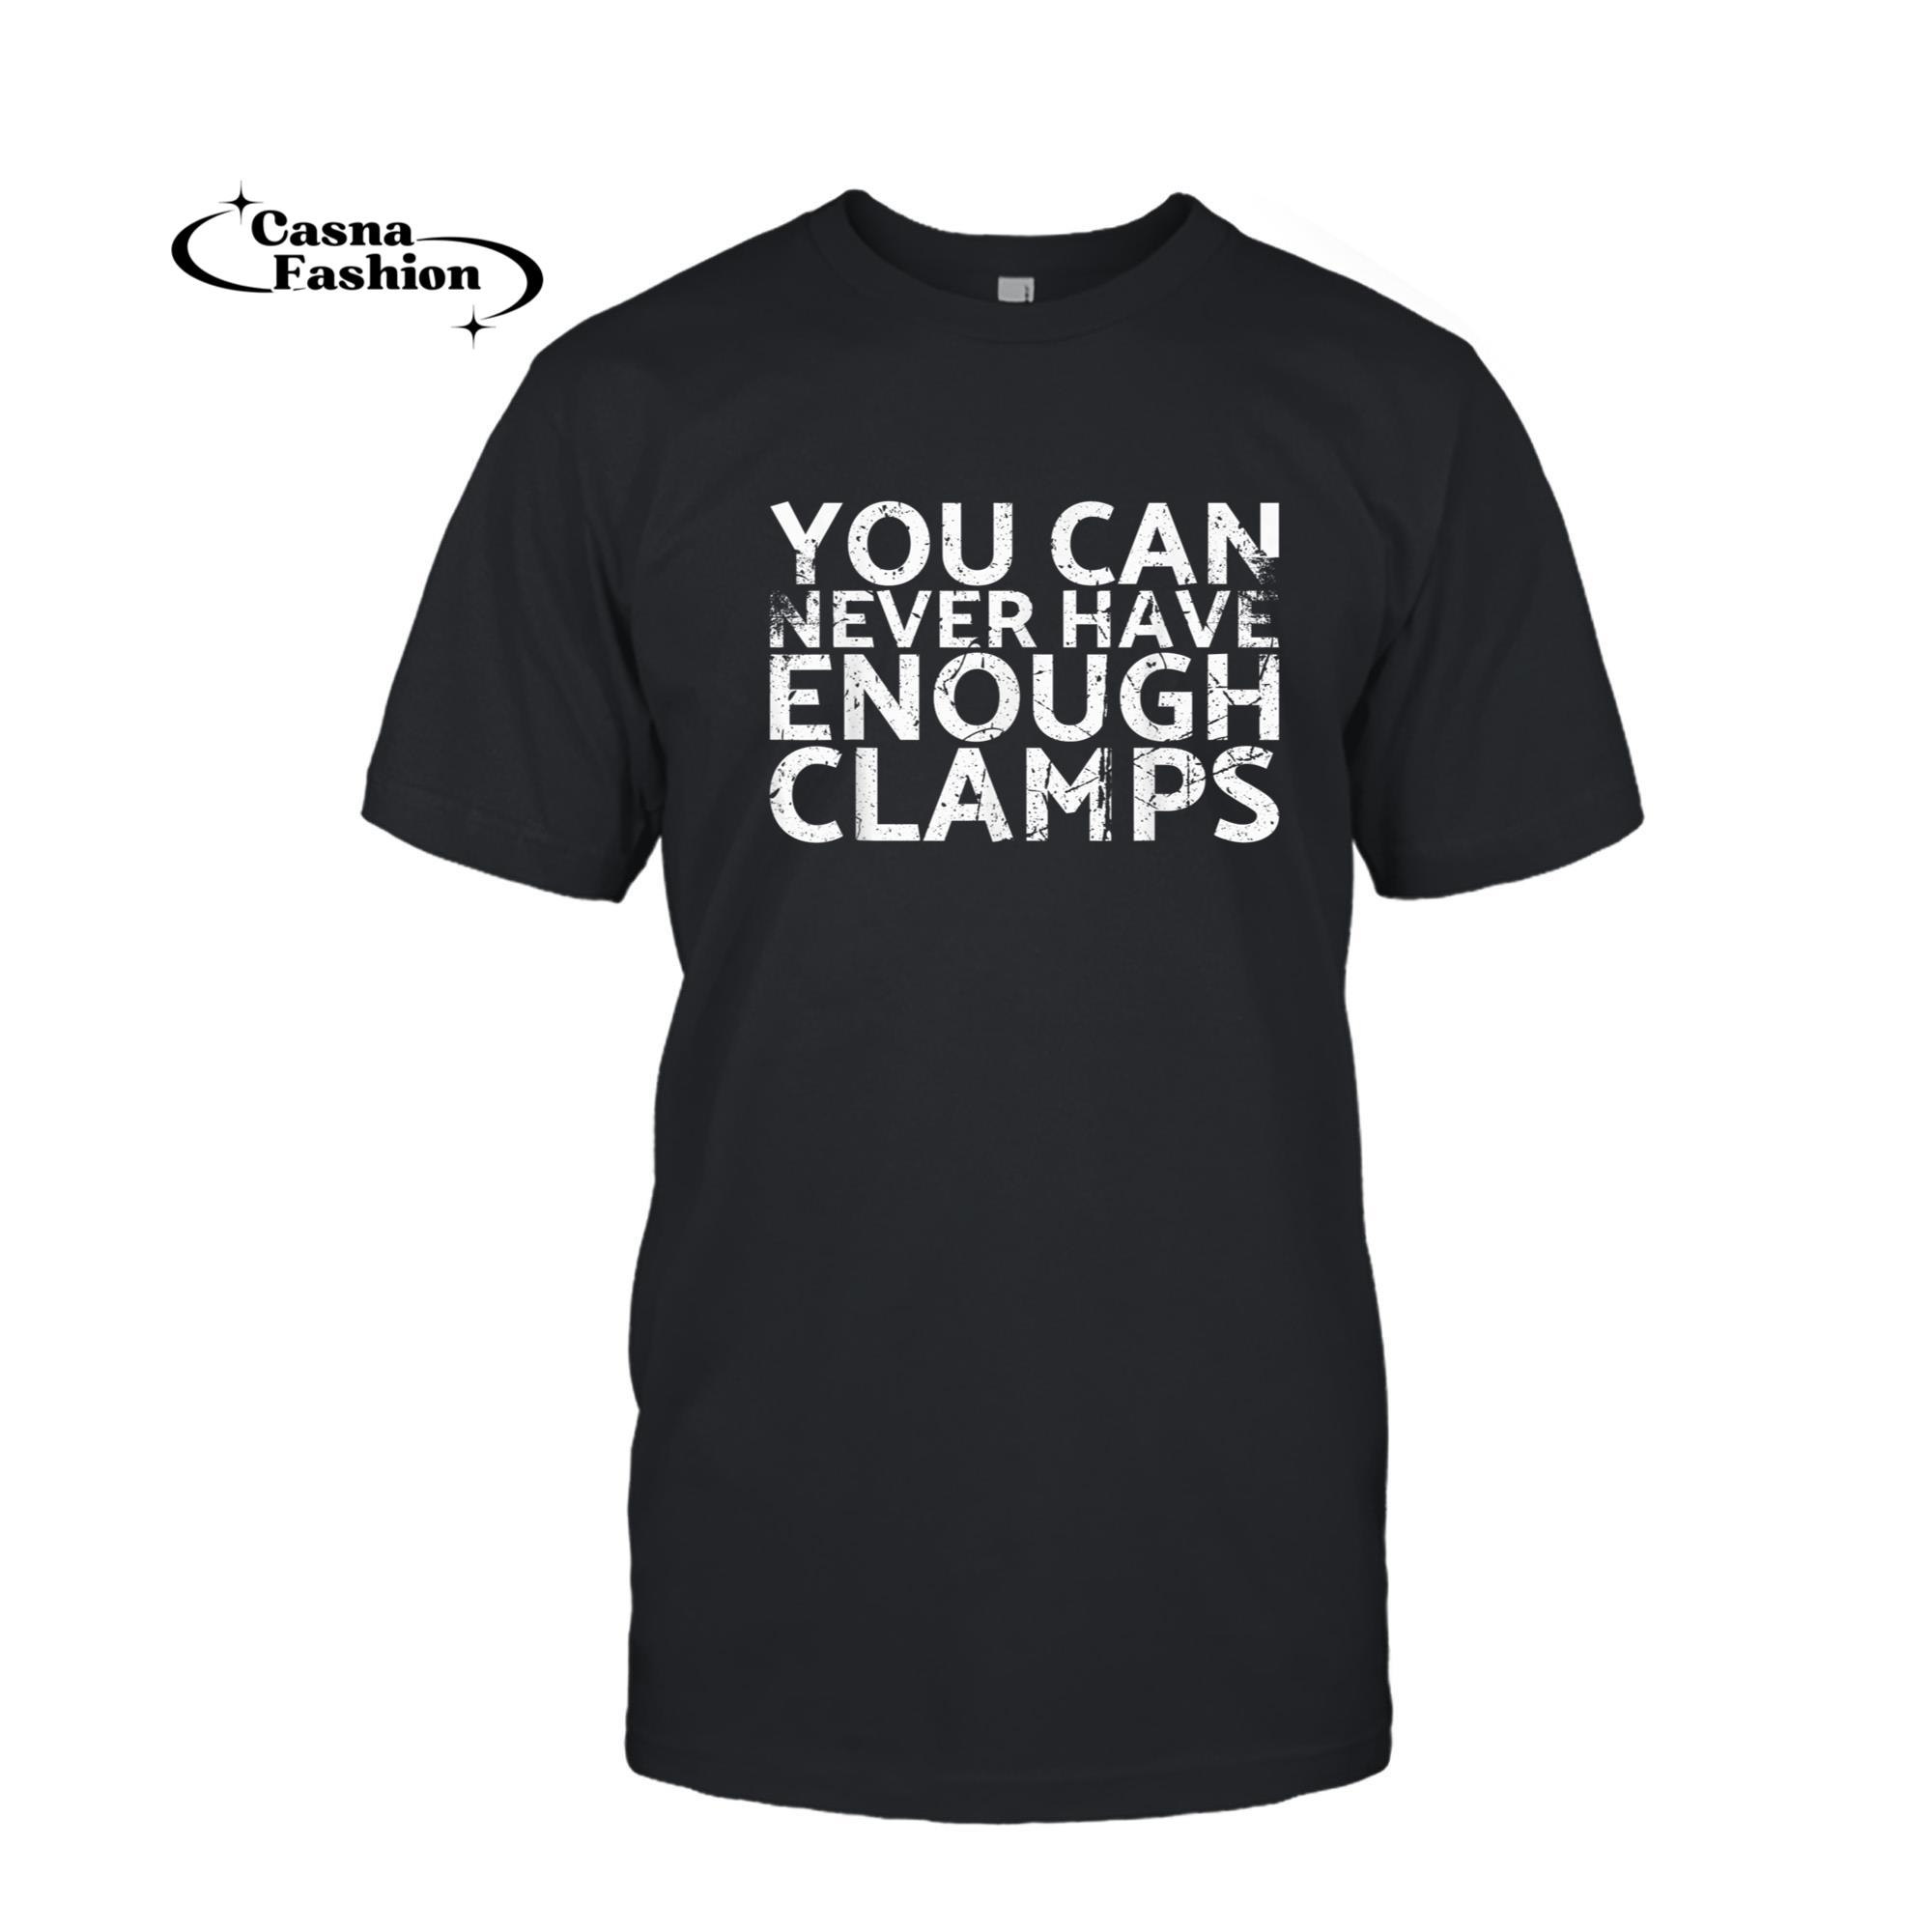 casnafashion_T-shirt_You Can Never Have Enough Clamps For Carpenters T-Shirt_T-shirt_Black